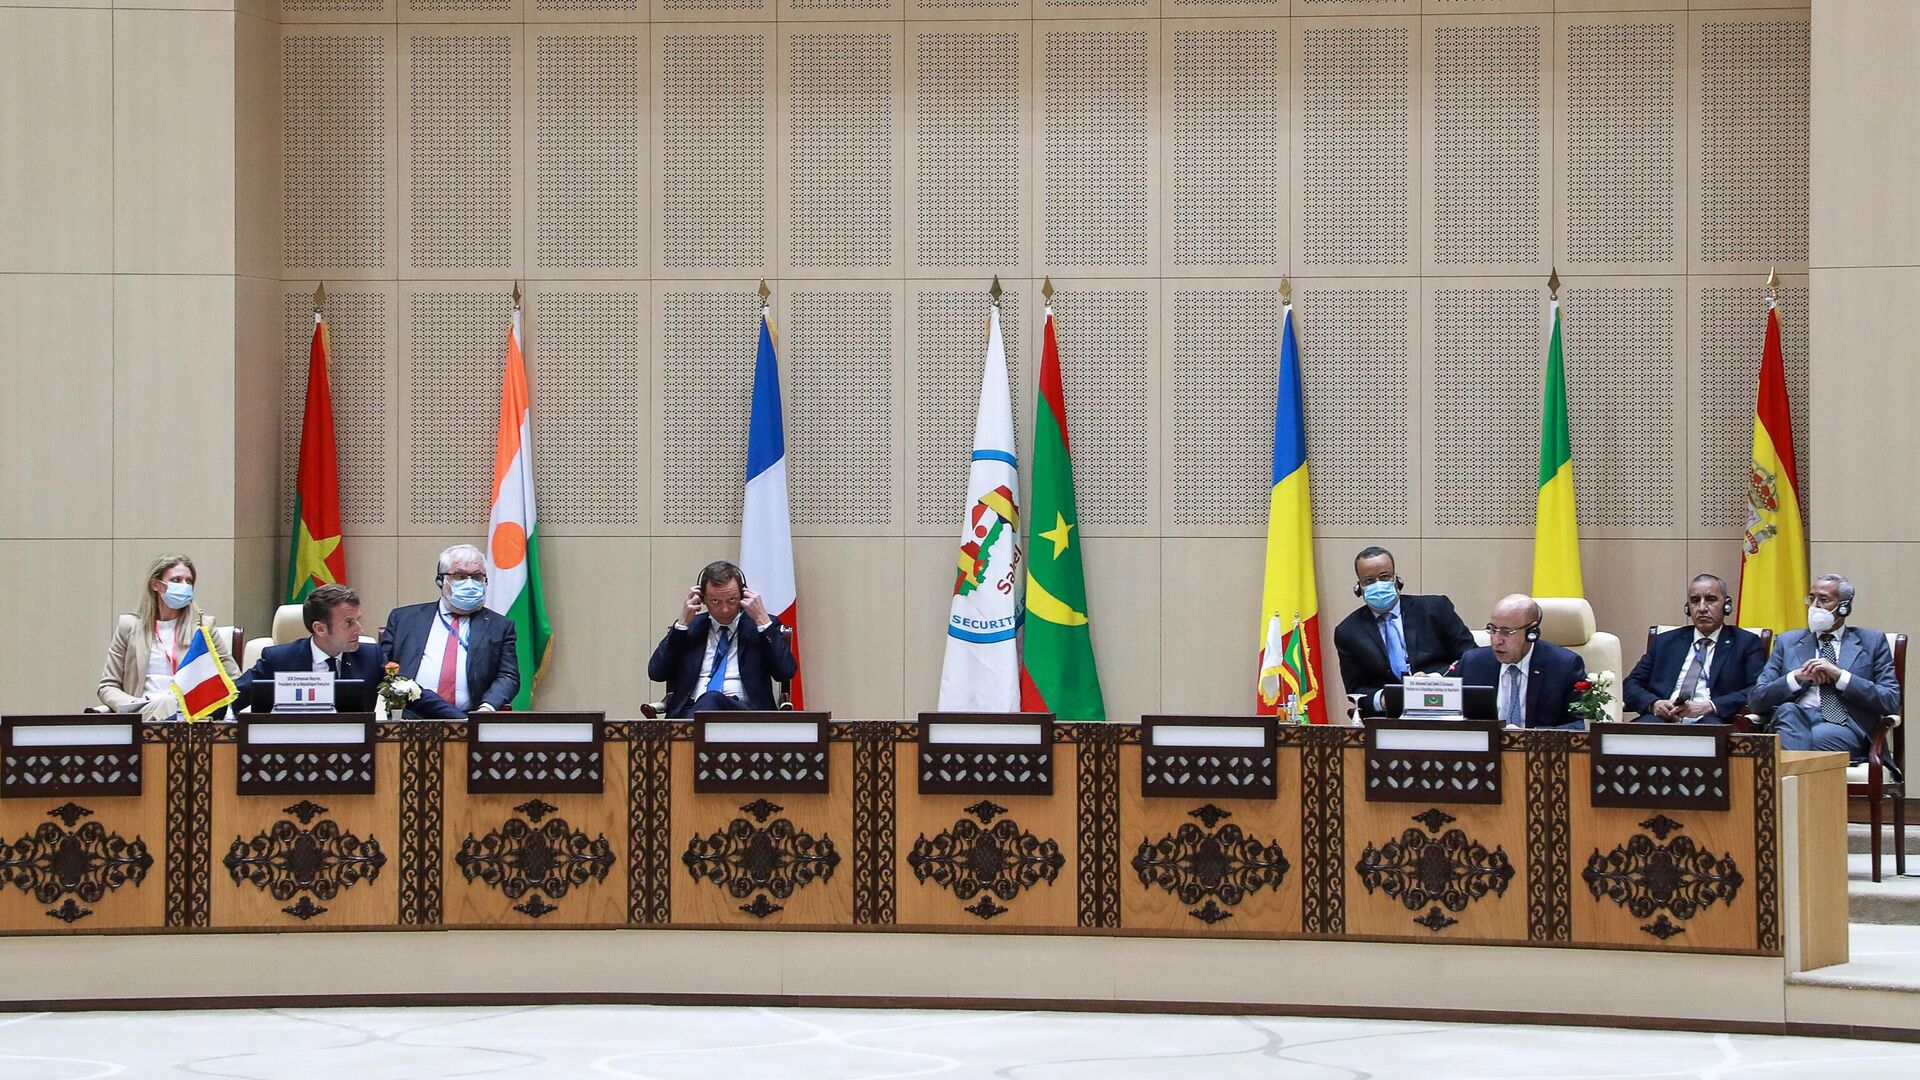 French President Emmanuel Macron, second left, listens as Mauritania president Mohamed Ould Cheikh El Ghazouani, third right, speaks during the G5 Sahel summit Tuesday, June 30, 2020, in Nouakchott. Leaders from the five countries of West Africa's Sahel region, Burkina Faso, Chad, Mali, Mauritania and Niger, meet with French President Emmanuel Macron and Spanish Prime Minister Pedro Sanchez in Mauritania's capital Nouakchott on Tuesday to discuss military operations against Islamic extremists in the region, as jihadist attacks mount.  - Sputnik Africa, 1920, 06.12.2023